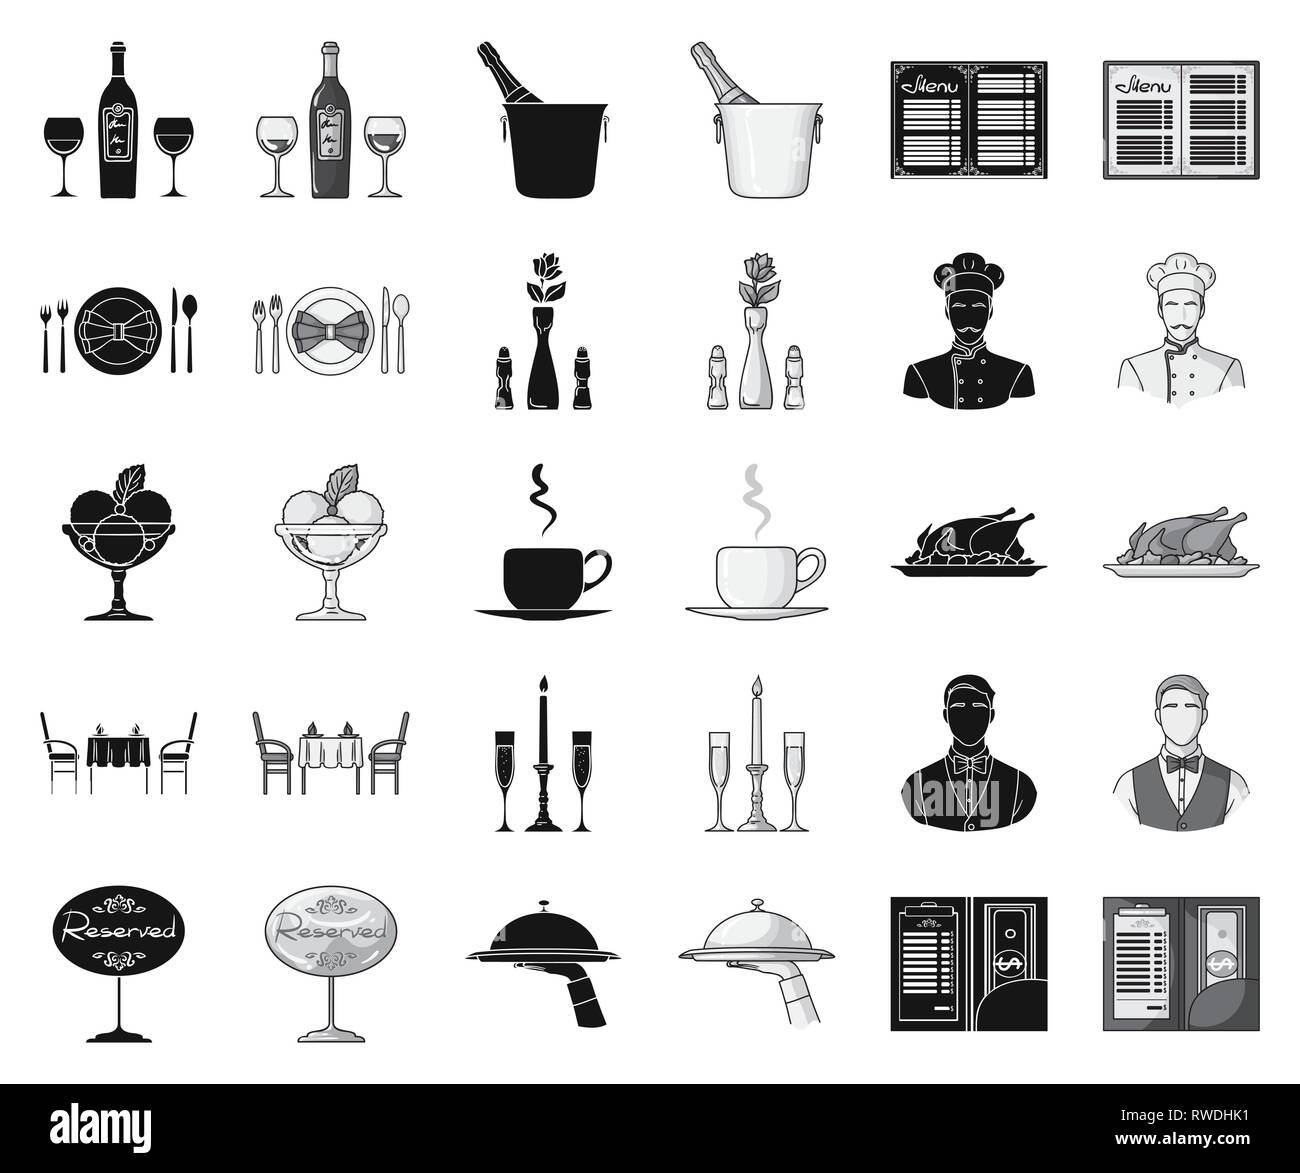 alcohol,black,monochrome,bottle,bow,bowl,bucket,candle,cash,champagne,chef,chicken,cloche,coffee,collection,cream,cup,dinner, food,glass,golden,hand,holding ,ice,icon,illustration,institution,lunch,menu,party,pastime,receipt,recreation, reserved ...